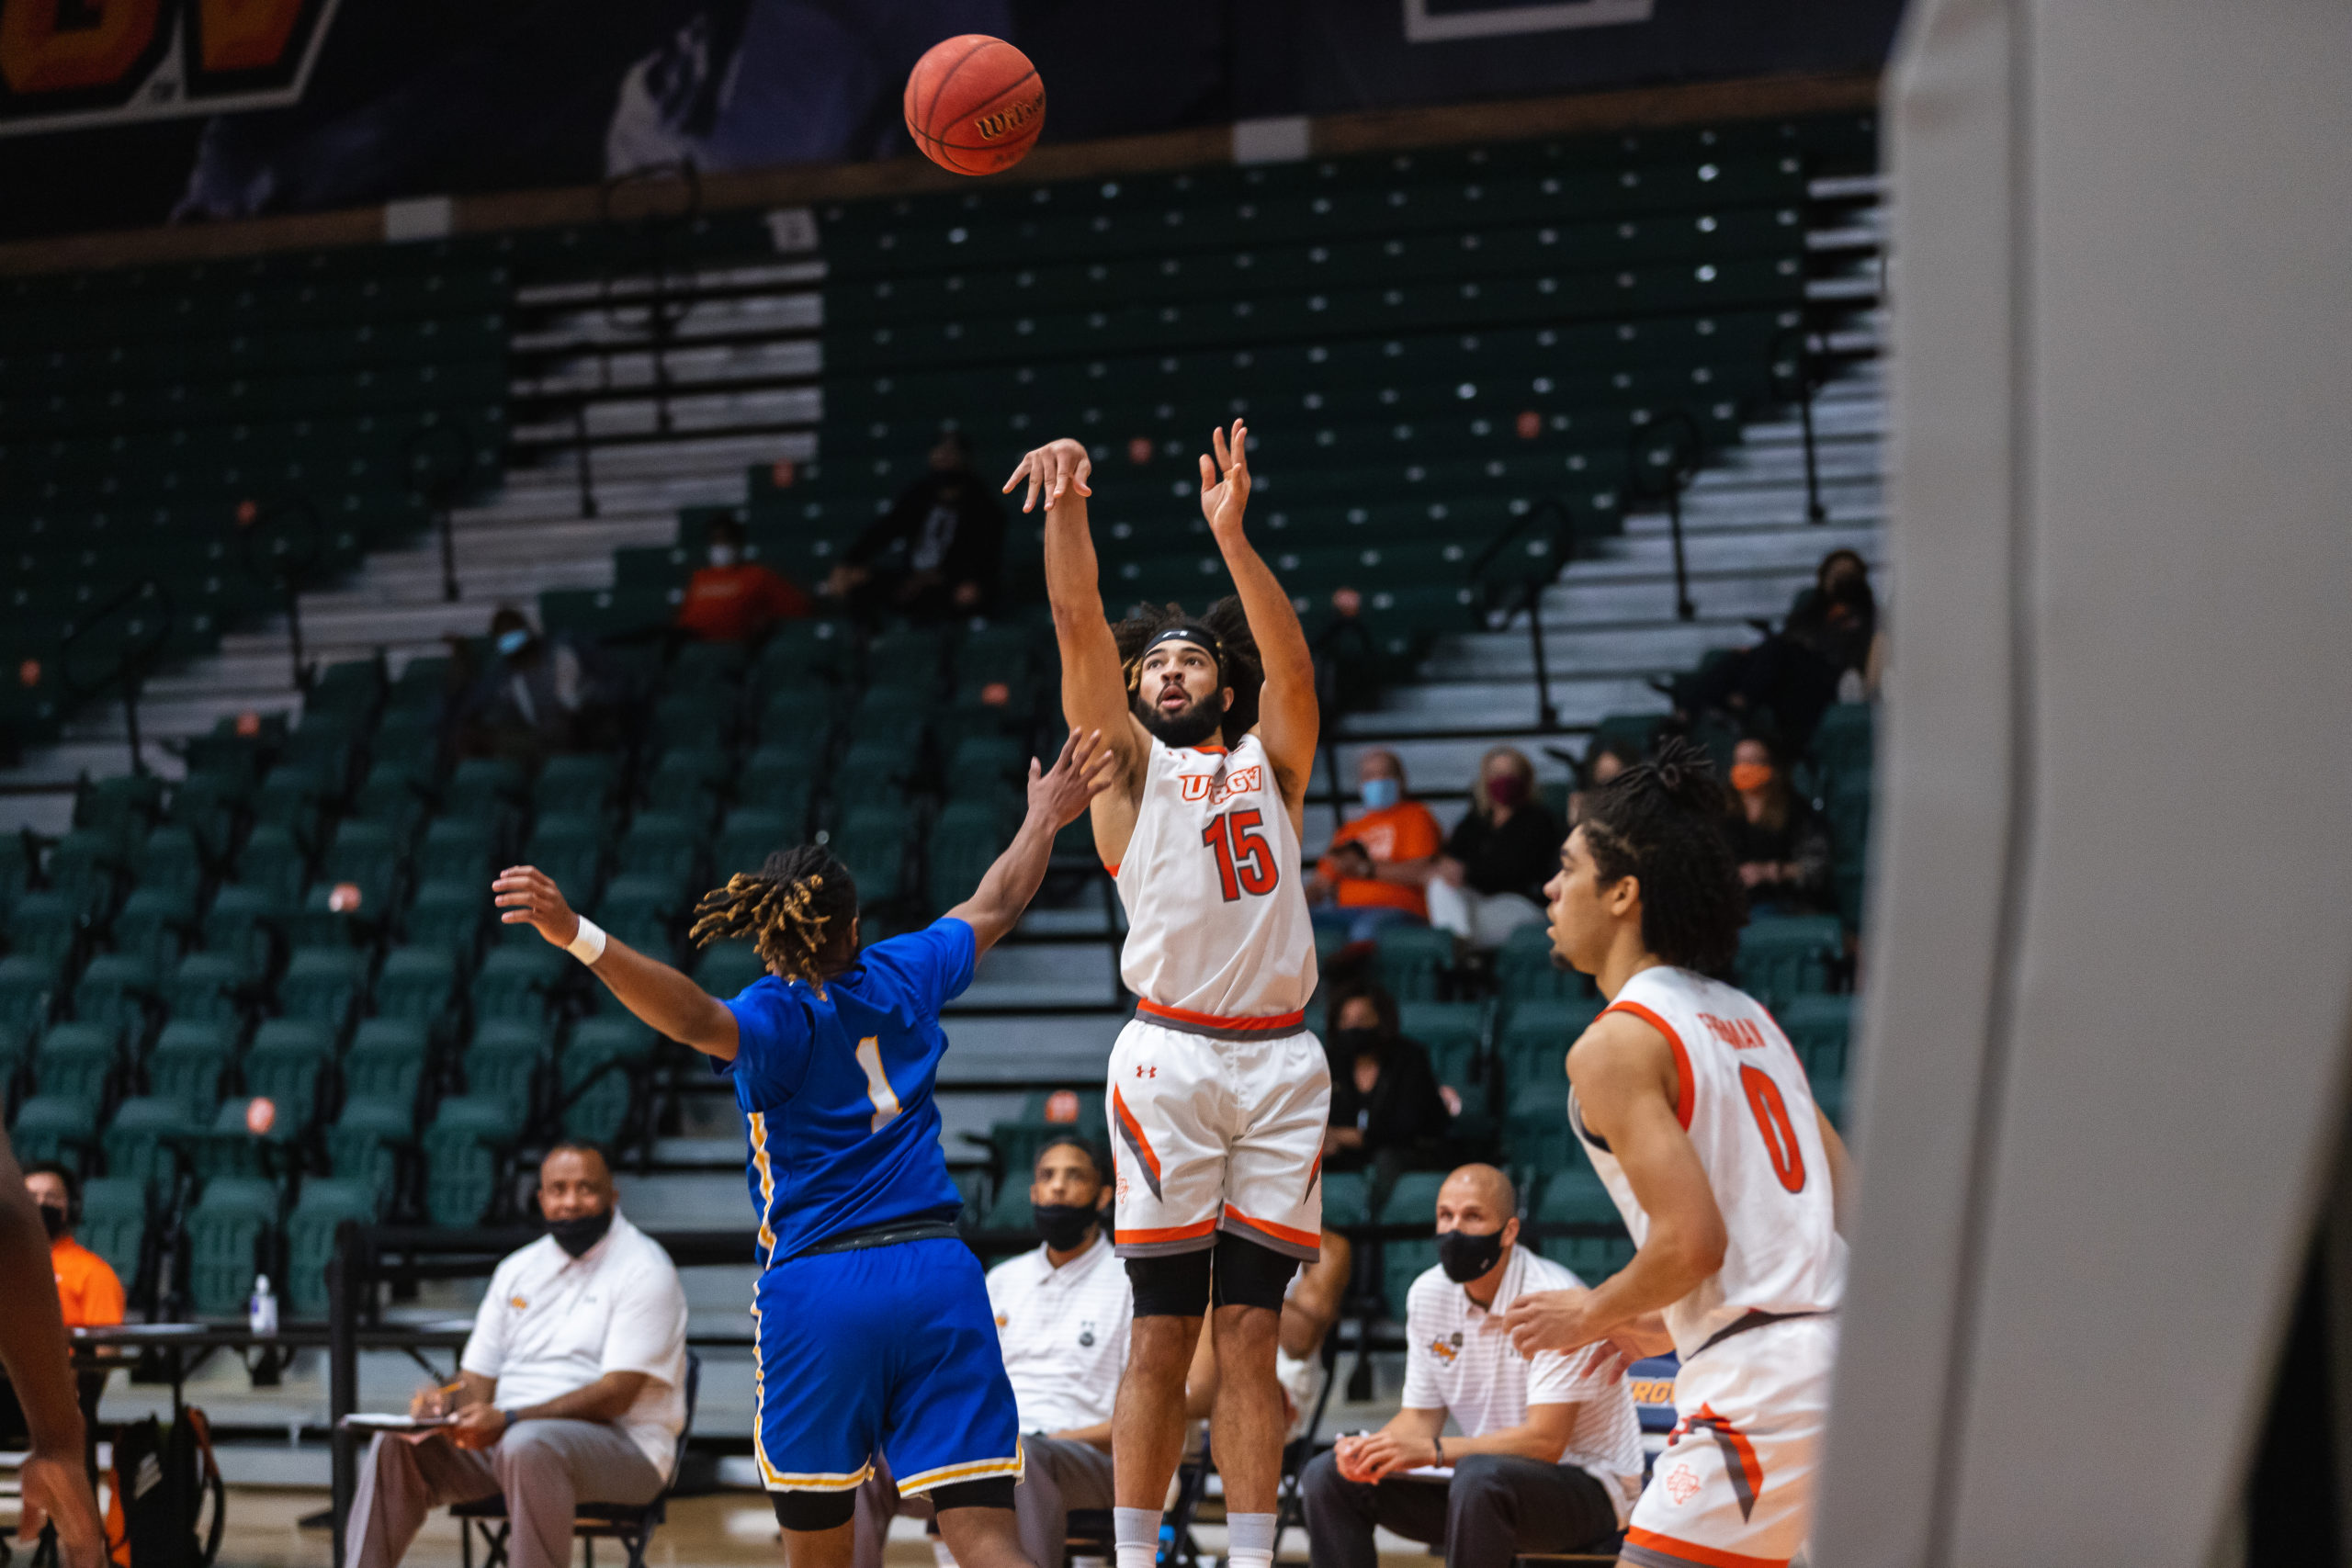 UTRGV ends non-conference on a high note